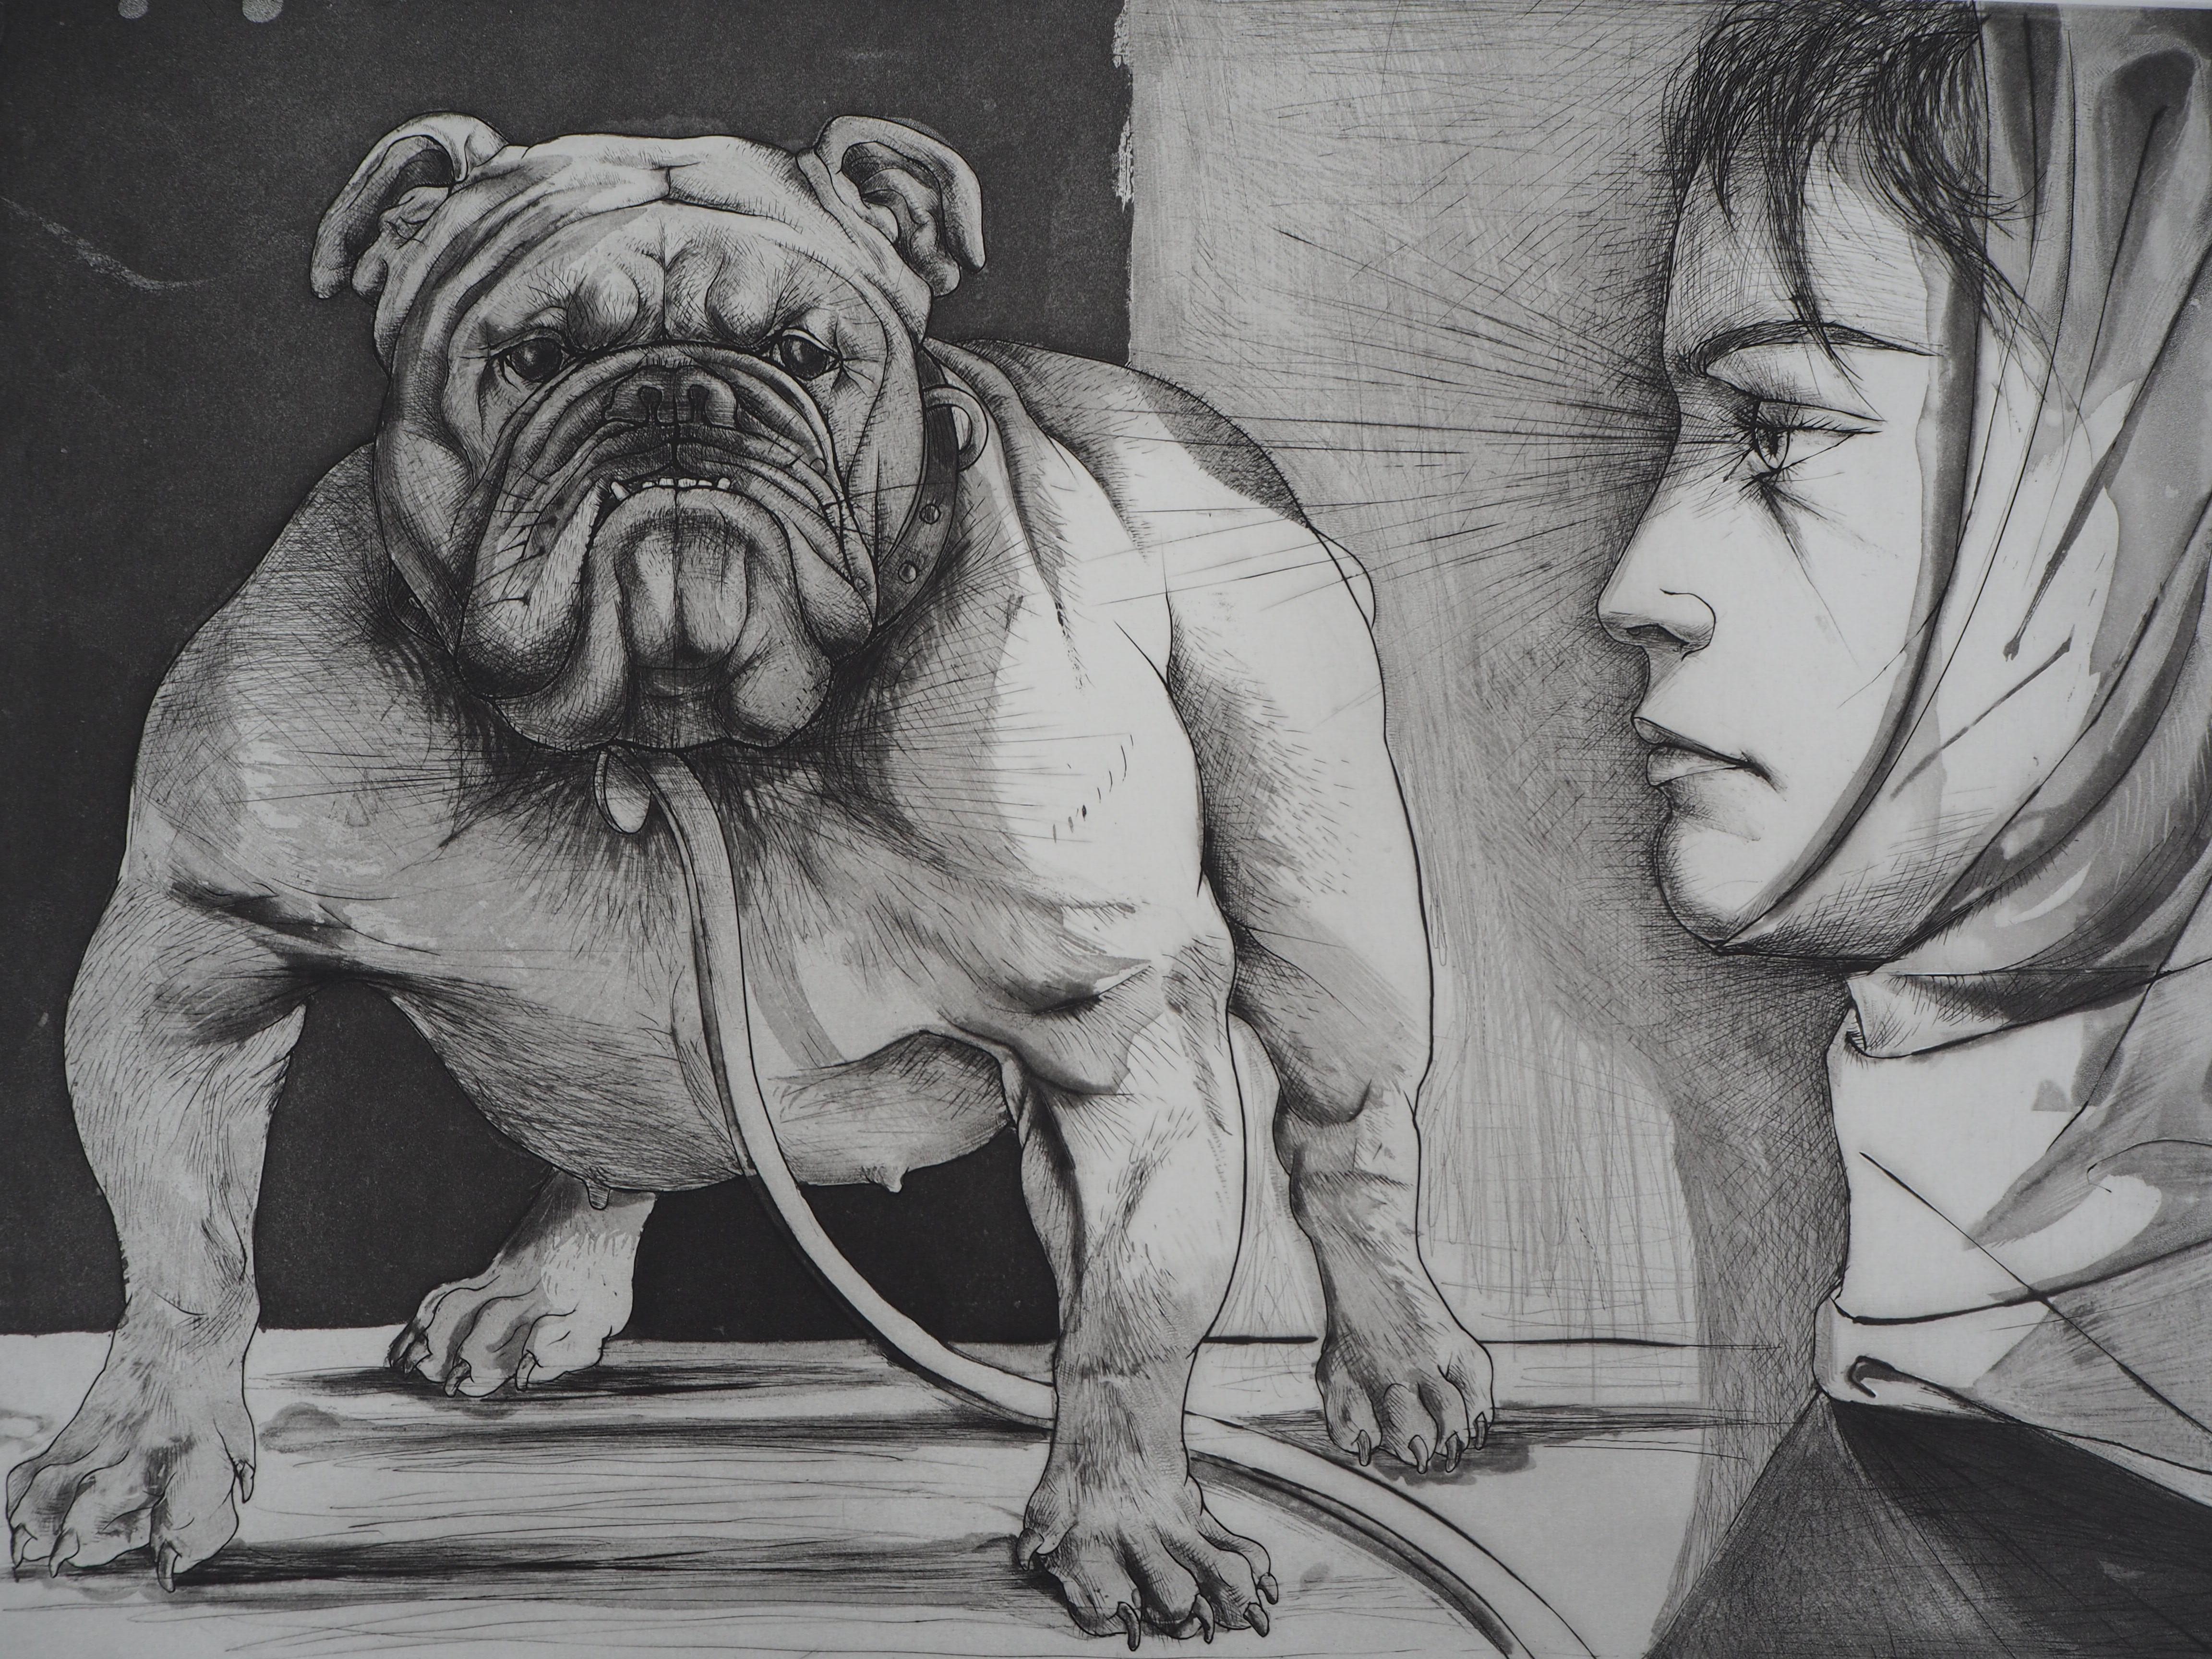 Pierre-Yves TREMOIS
Bulldog and Woman, 1974

Original etching
Handsigned in pencil
Justified EA or numbered / 80
On vellum 76 x 56 cm (c.30 x 22 inch)

Excellent condition